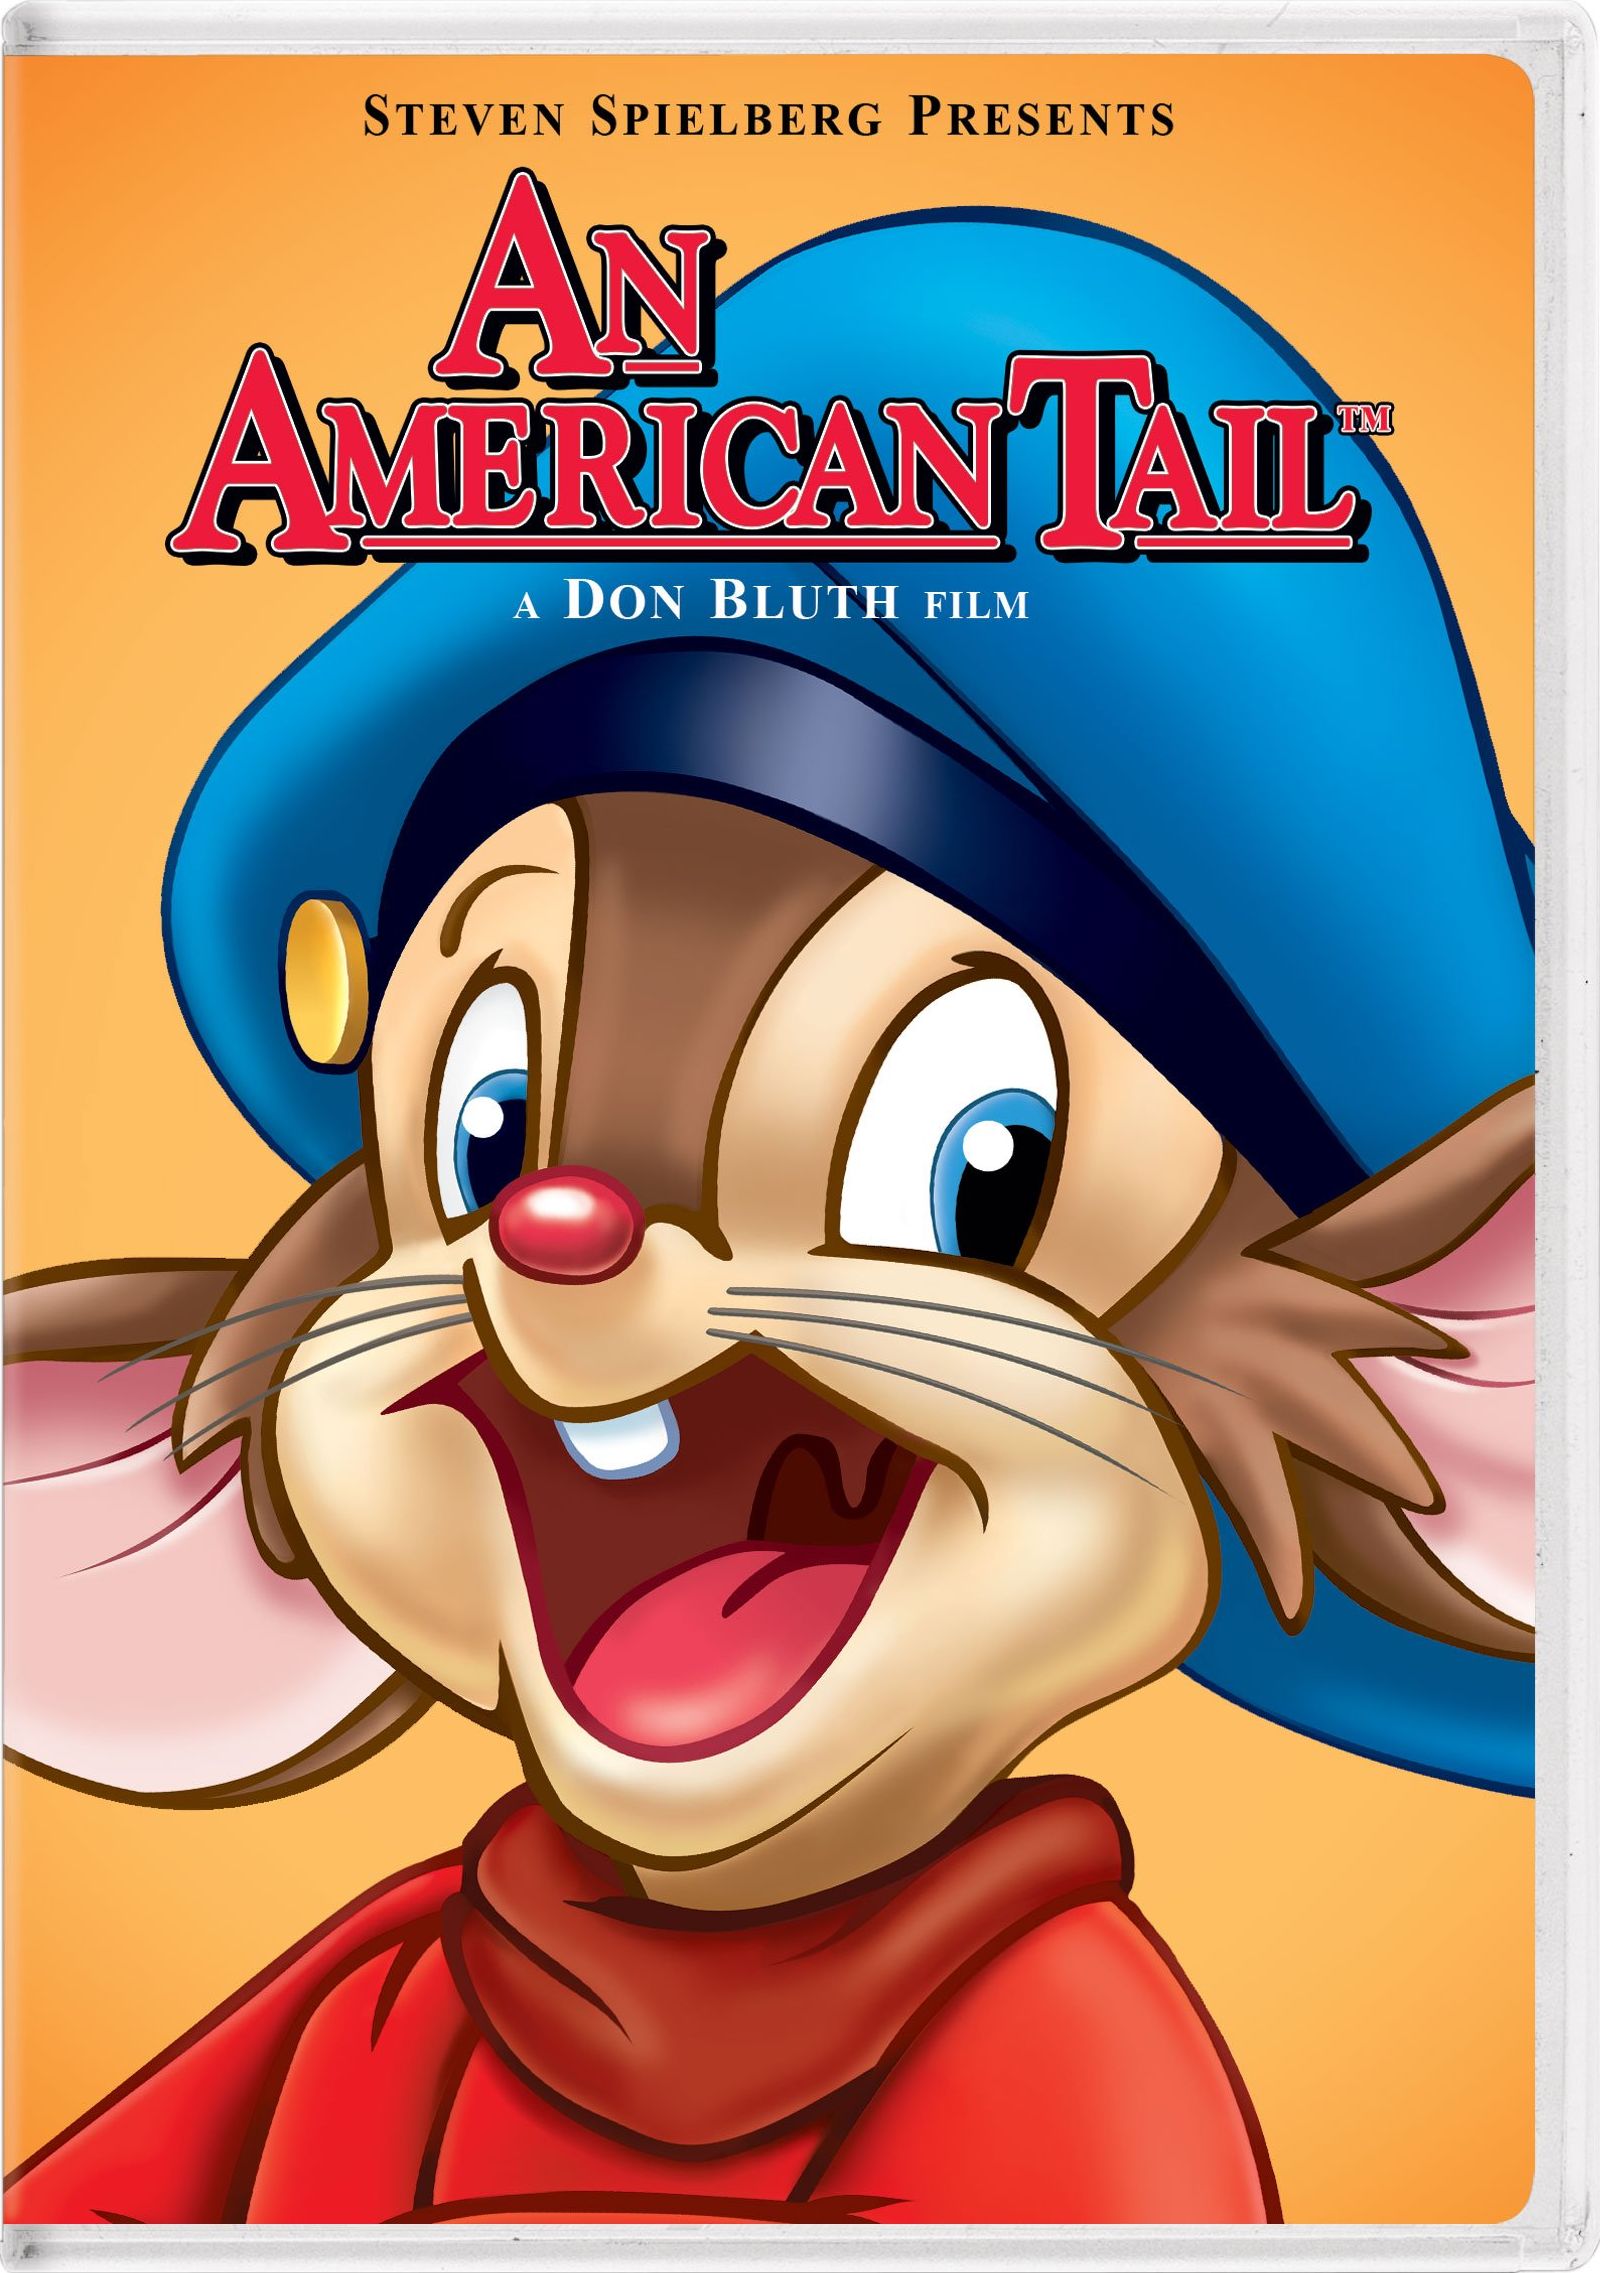 An American Tail #1